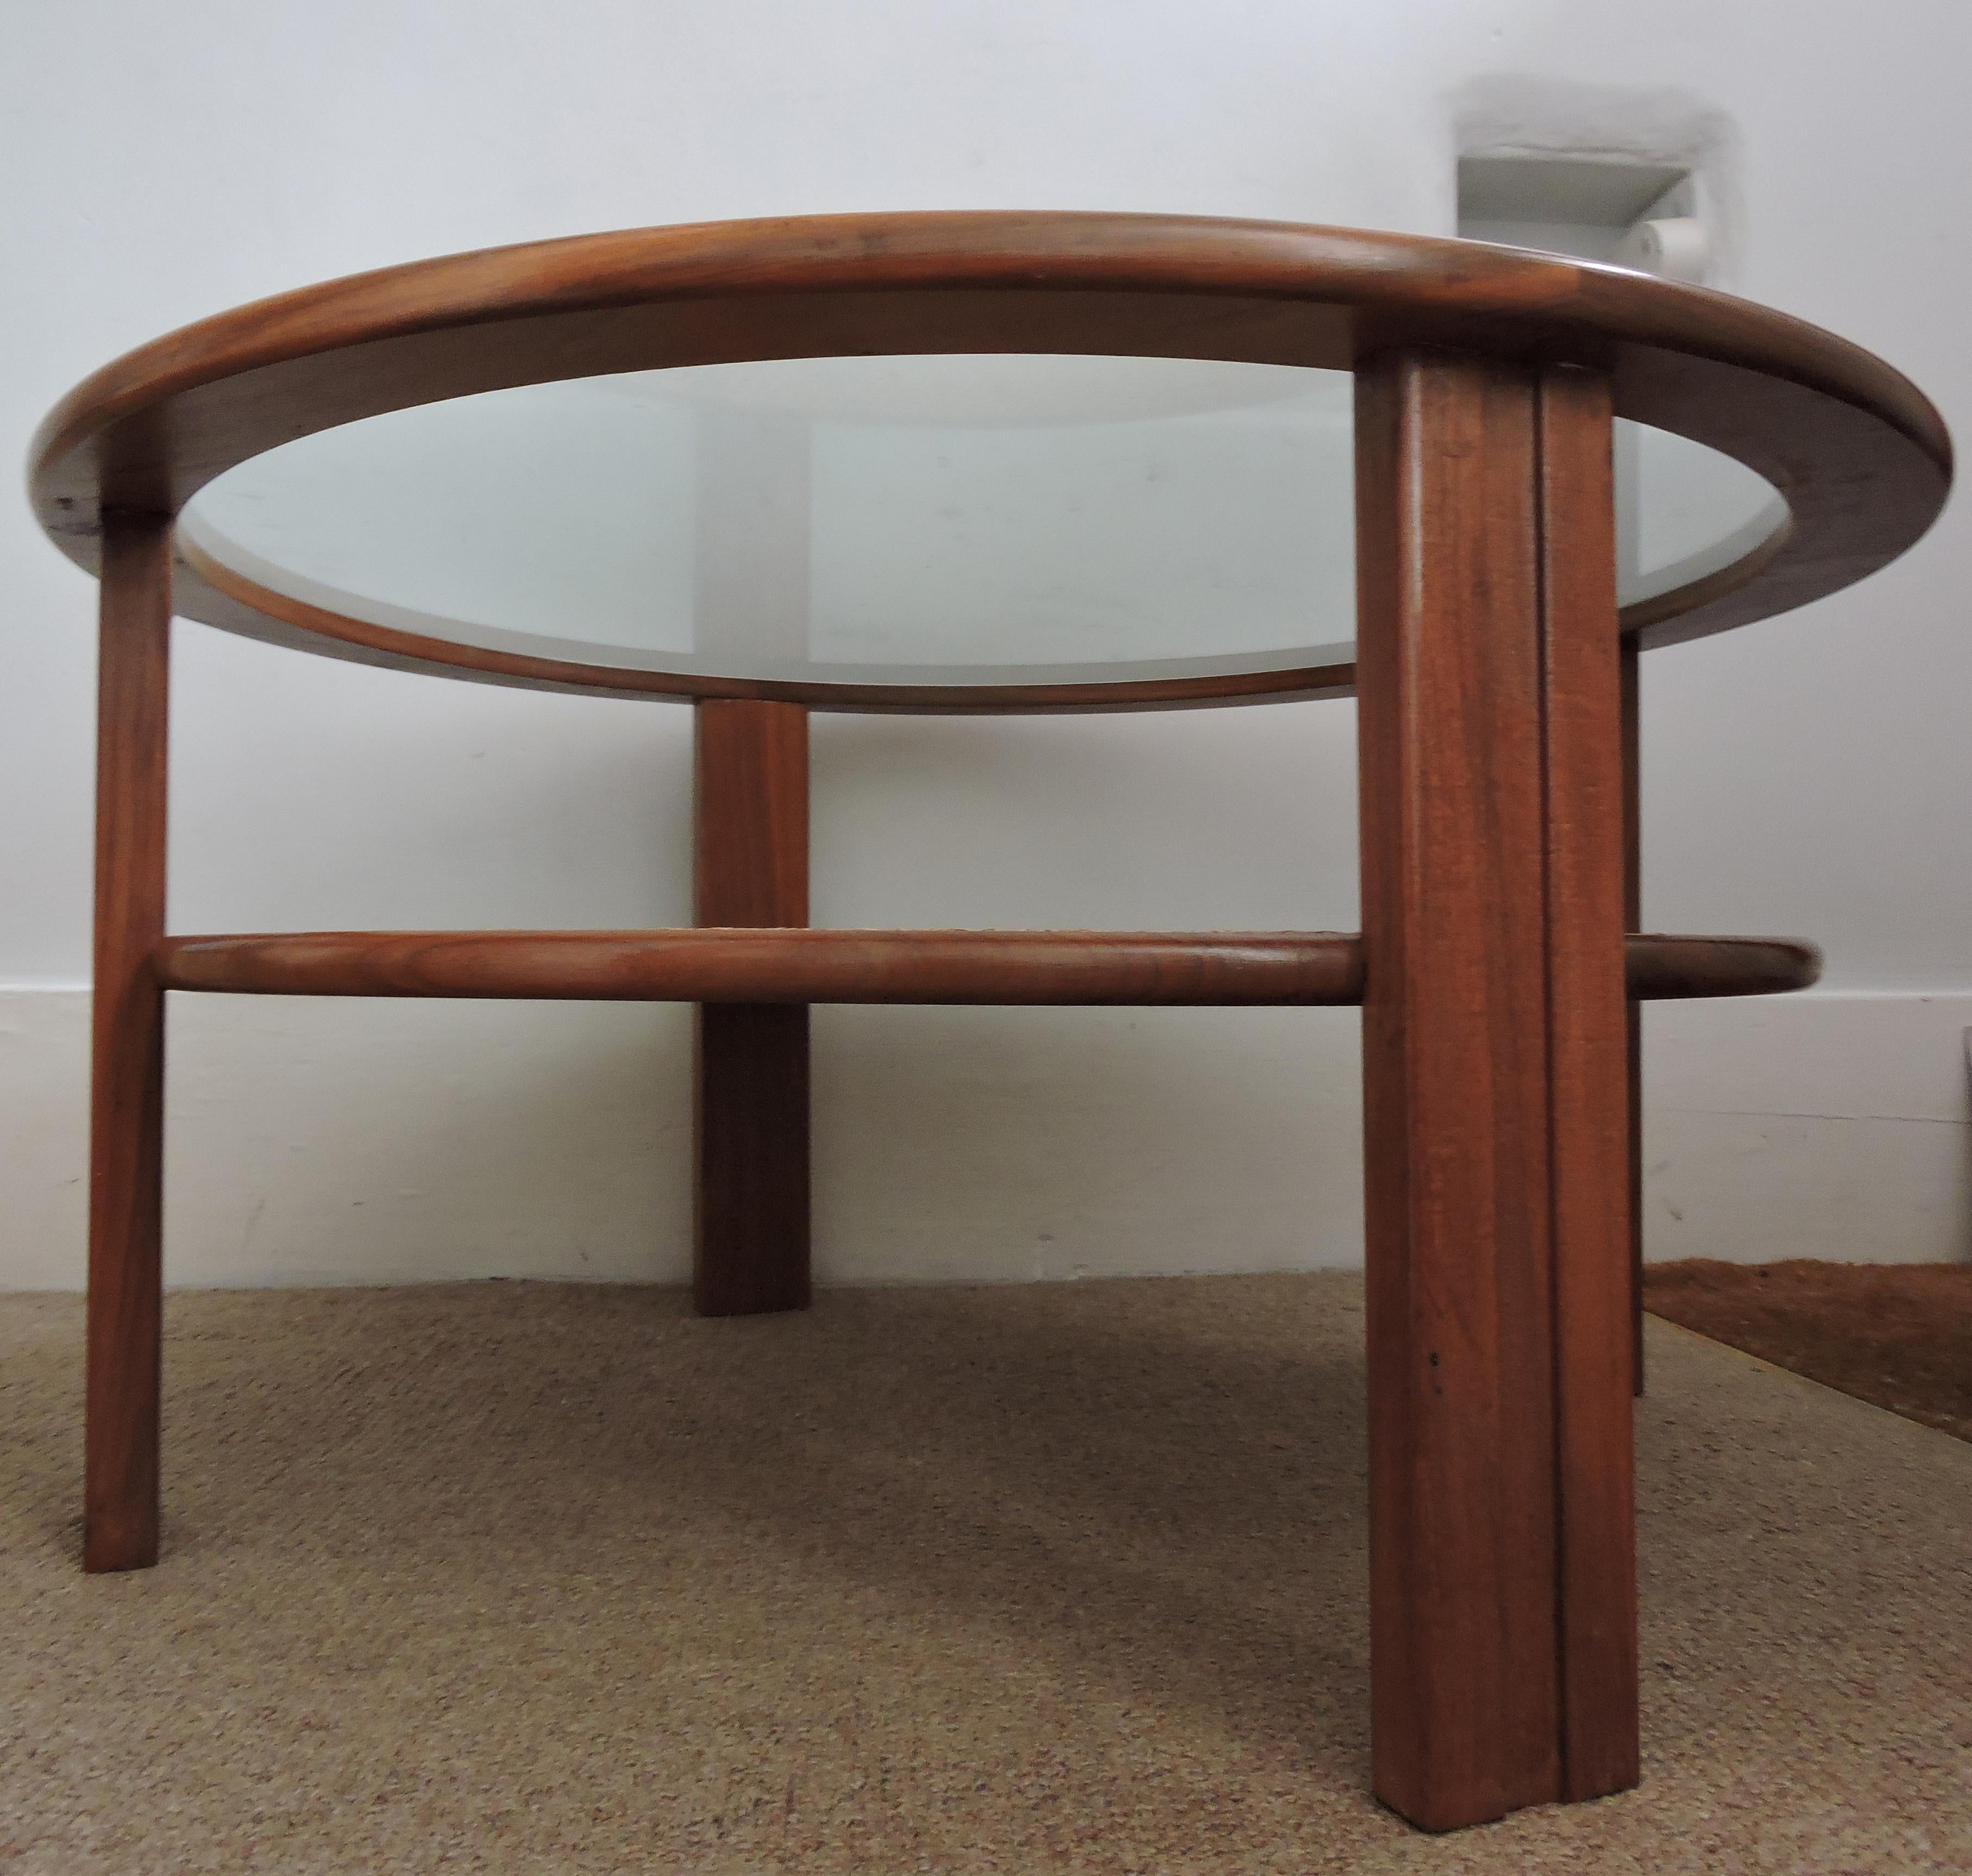 British Teak Coffee Table with Cane Shelf by G-Plan, 1970s For Sale